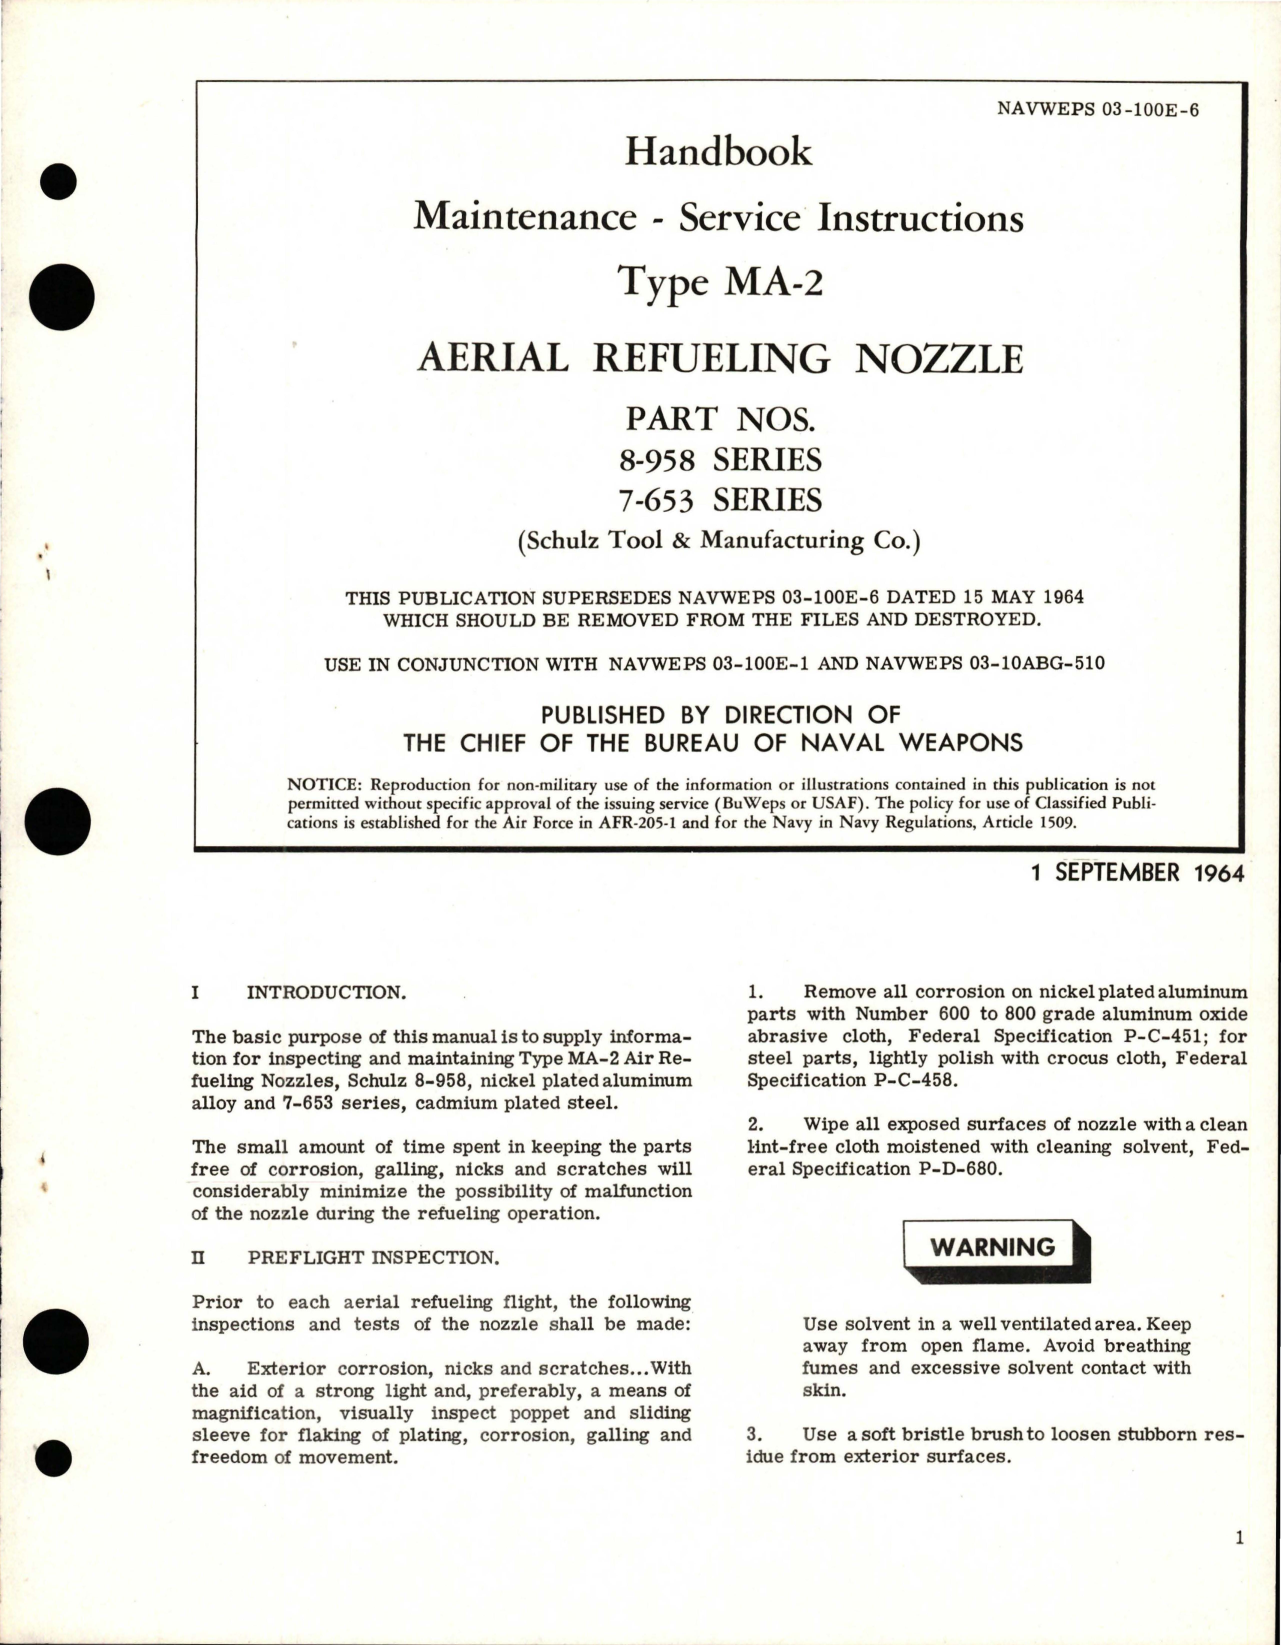 Sample page 1 from AirCorps Library document: Maintenance and Service Instructions for Aerial Refueling Nozzle - Type MA-2, Parts 8-958, 7-653